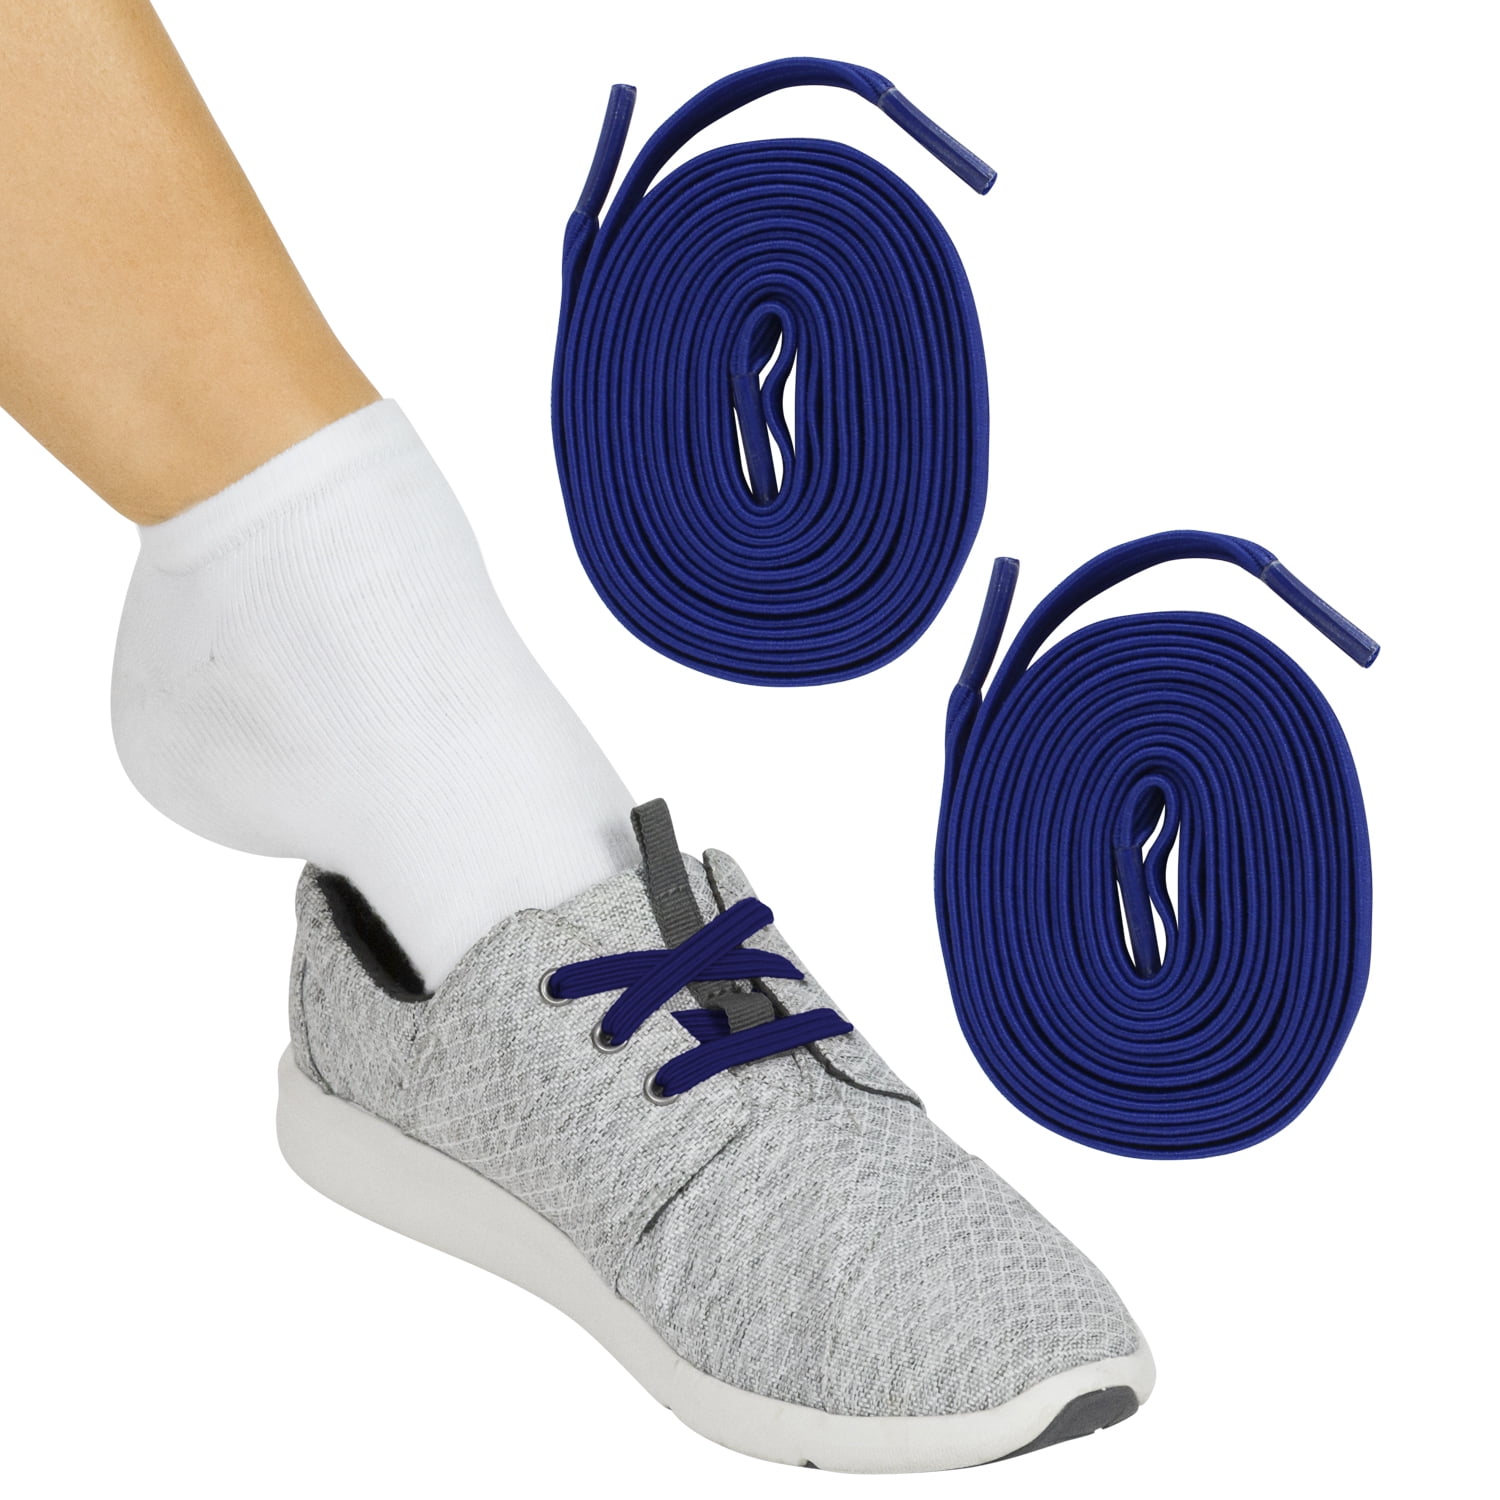 white shoelaces with black tips